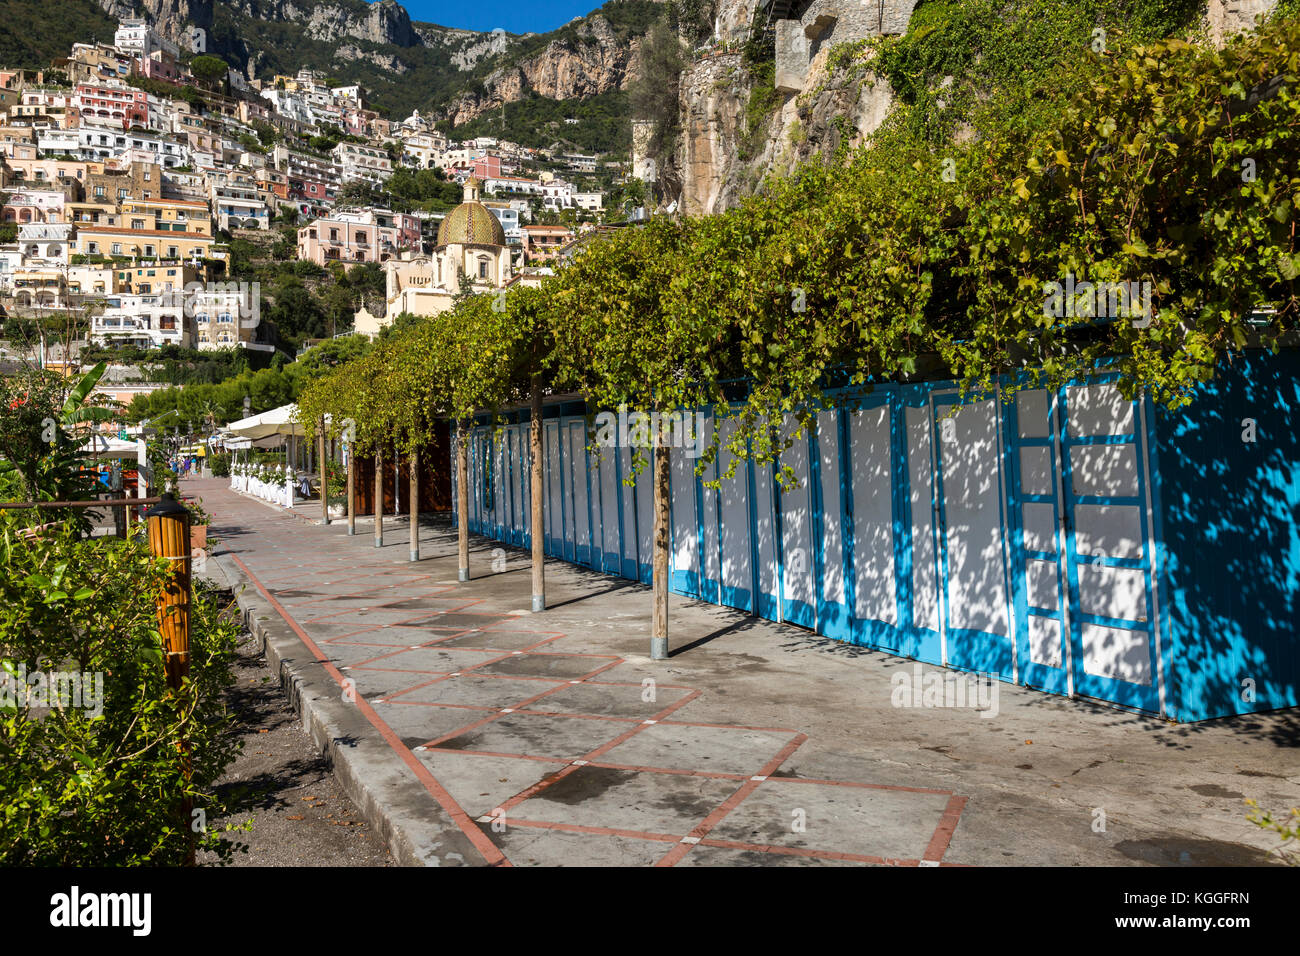 Blue and white beach changing rooms lined up on Spiaggia Grande beach in Positano, Italy. Stock Photo